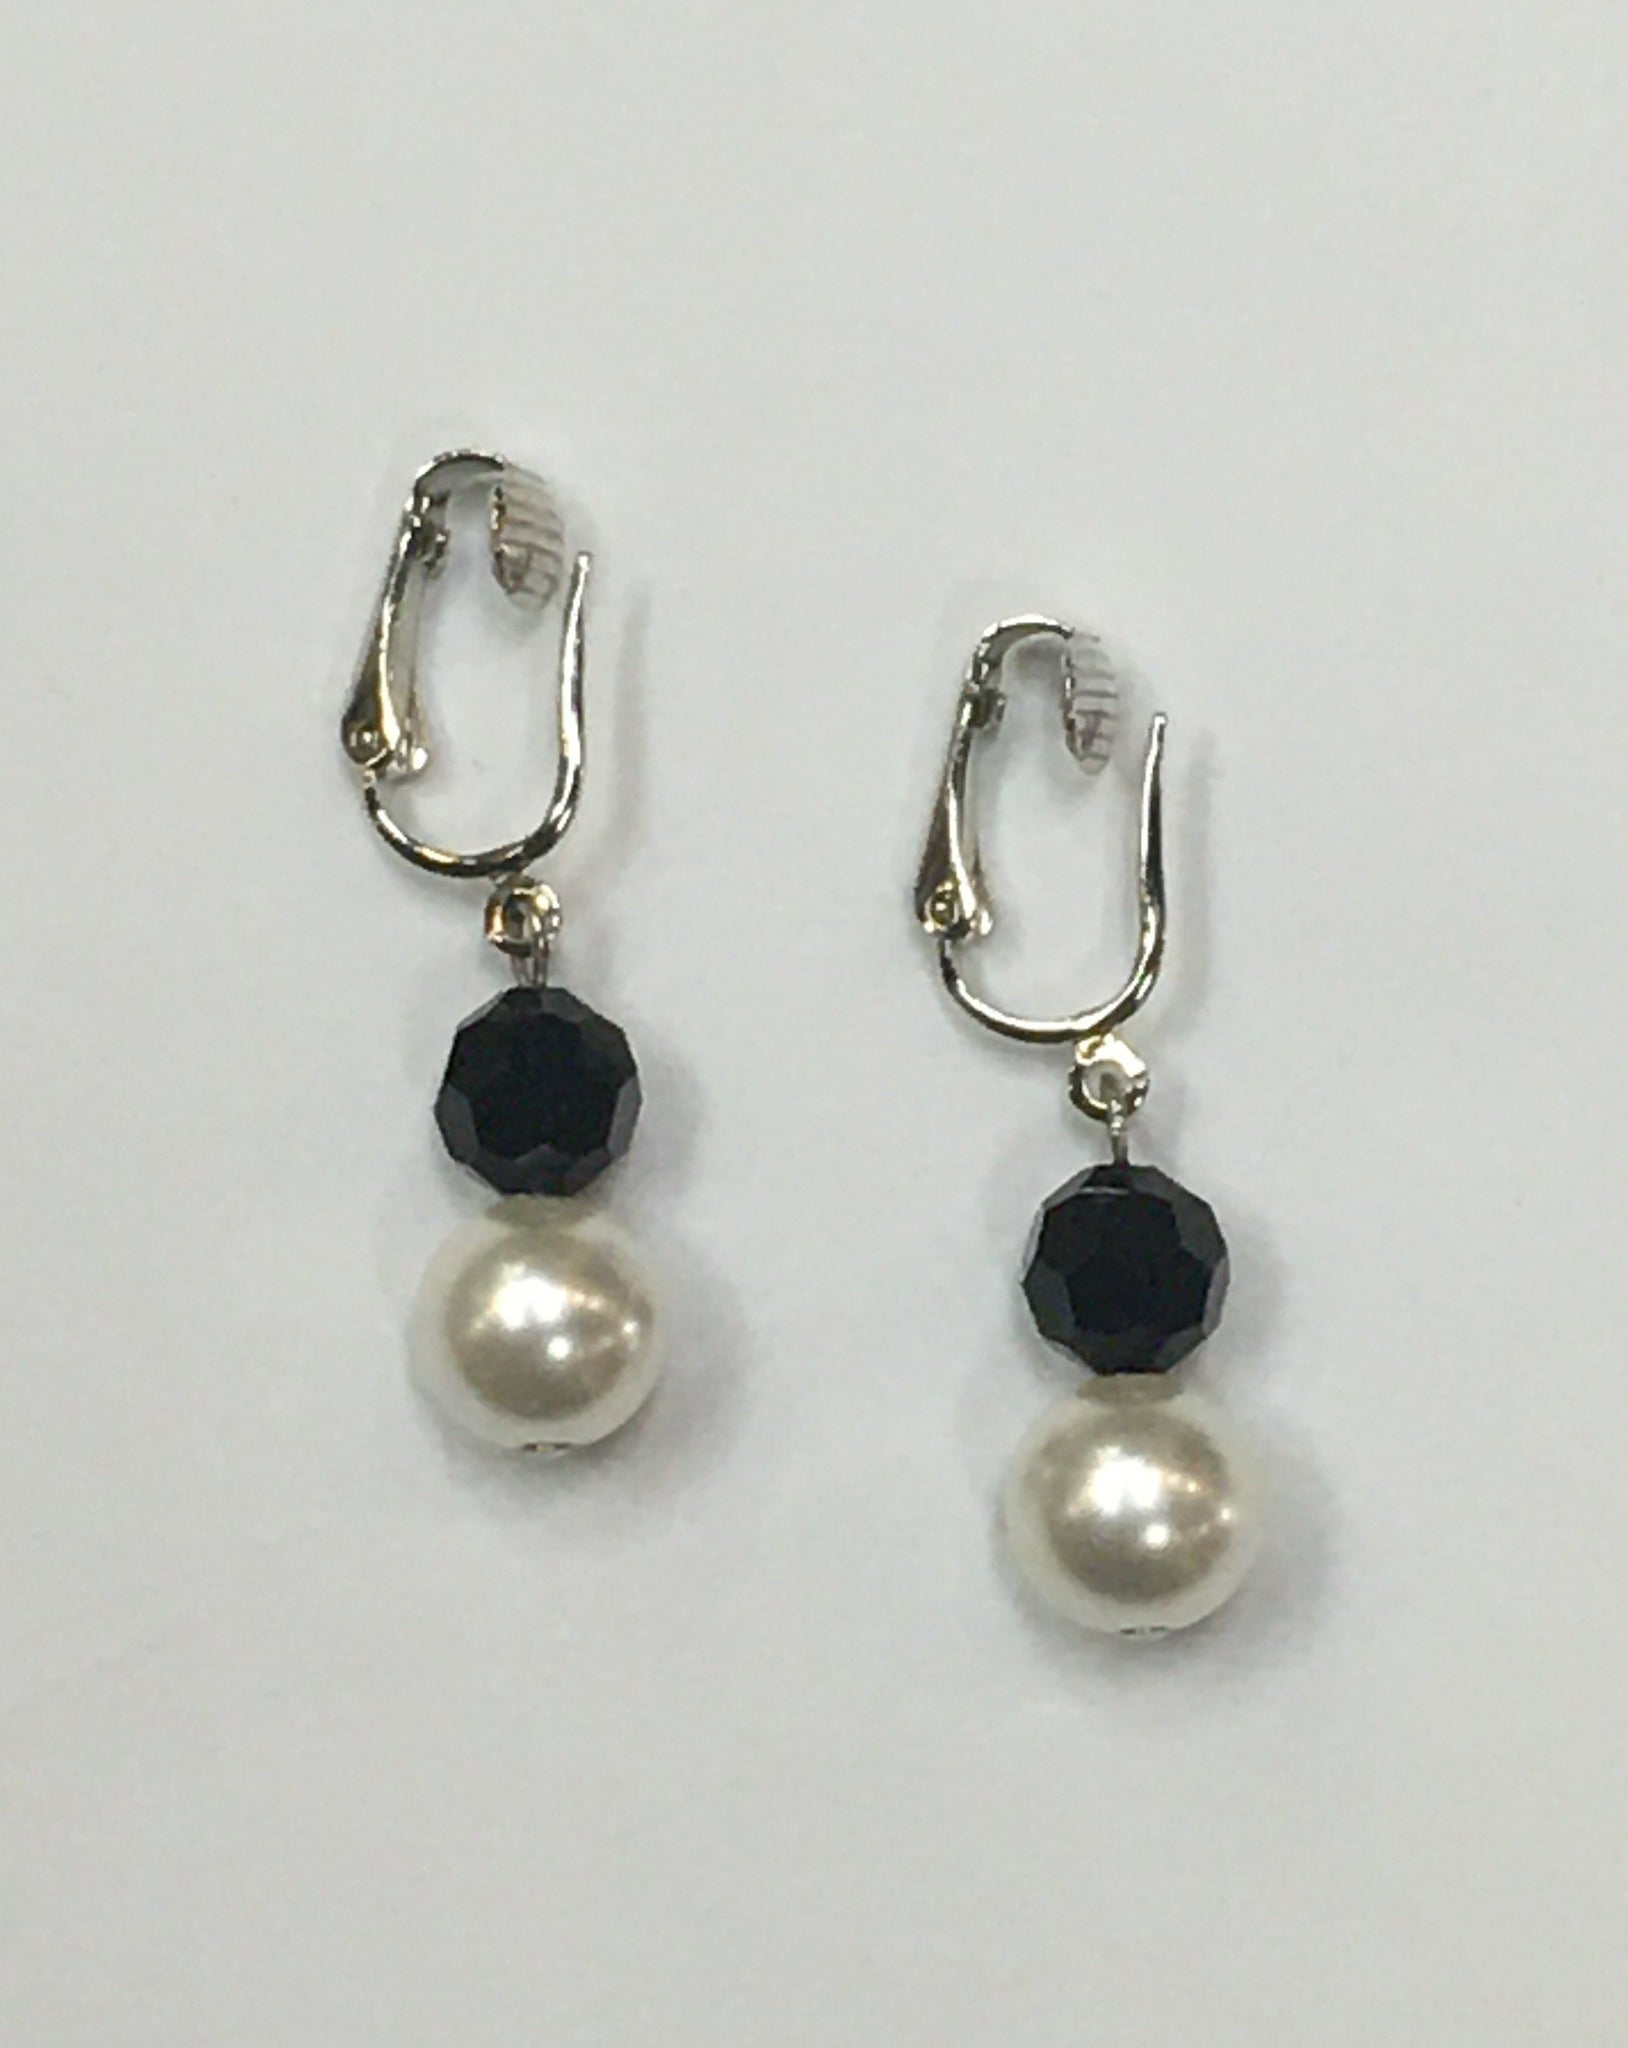 Clip Earrings- Pearls with Black Beads